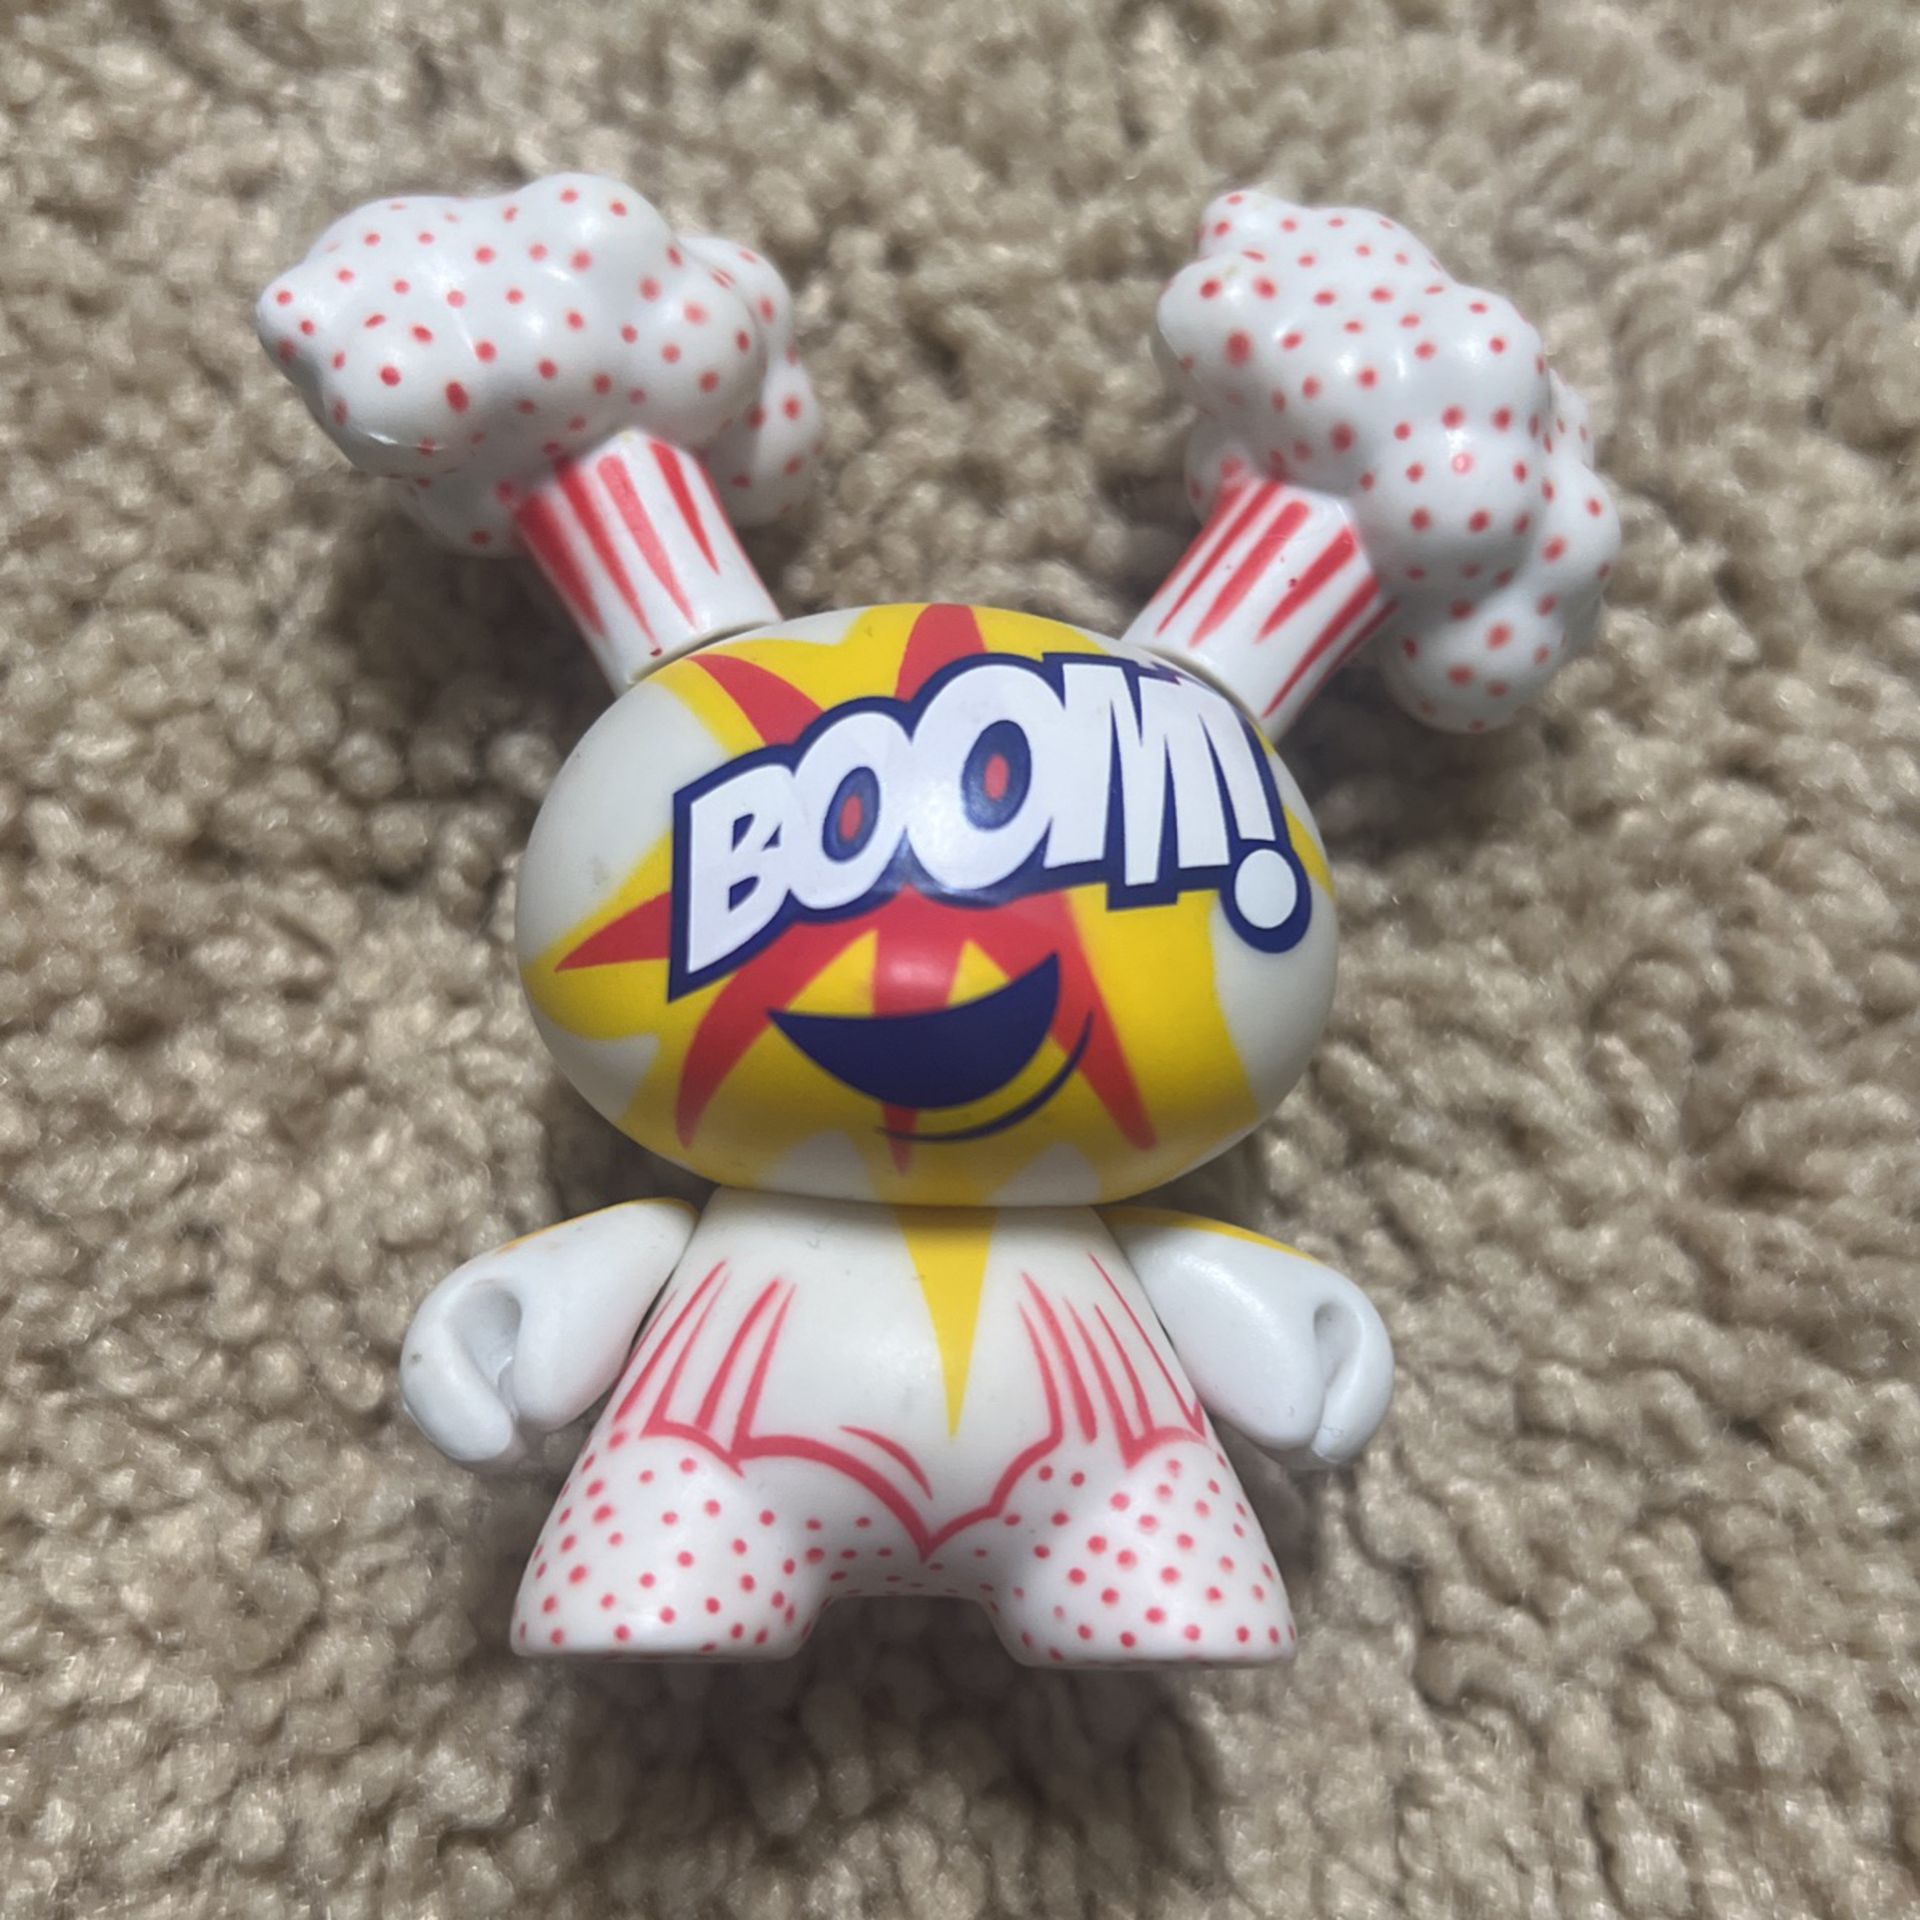 DUNNY 3" 2010 SERIES SKET ONE BOOM COLLECTABLE VINYL FIGURINE